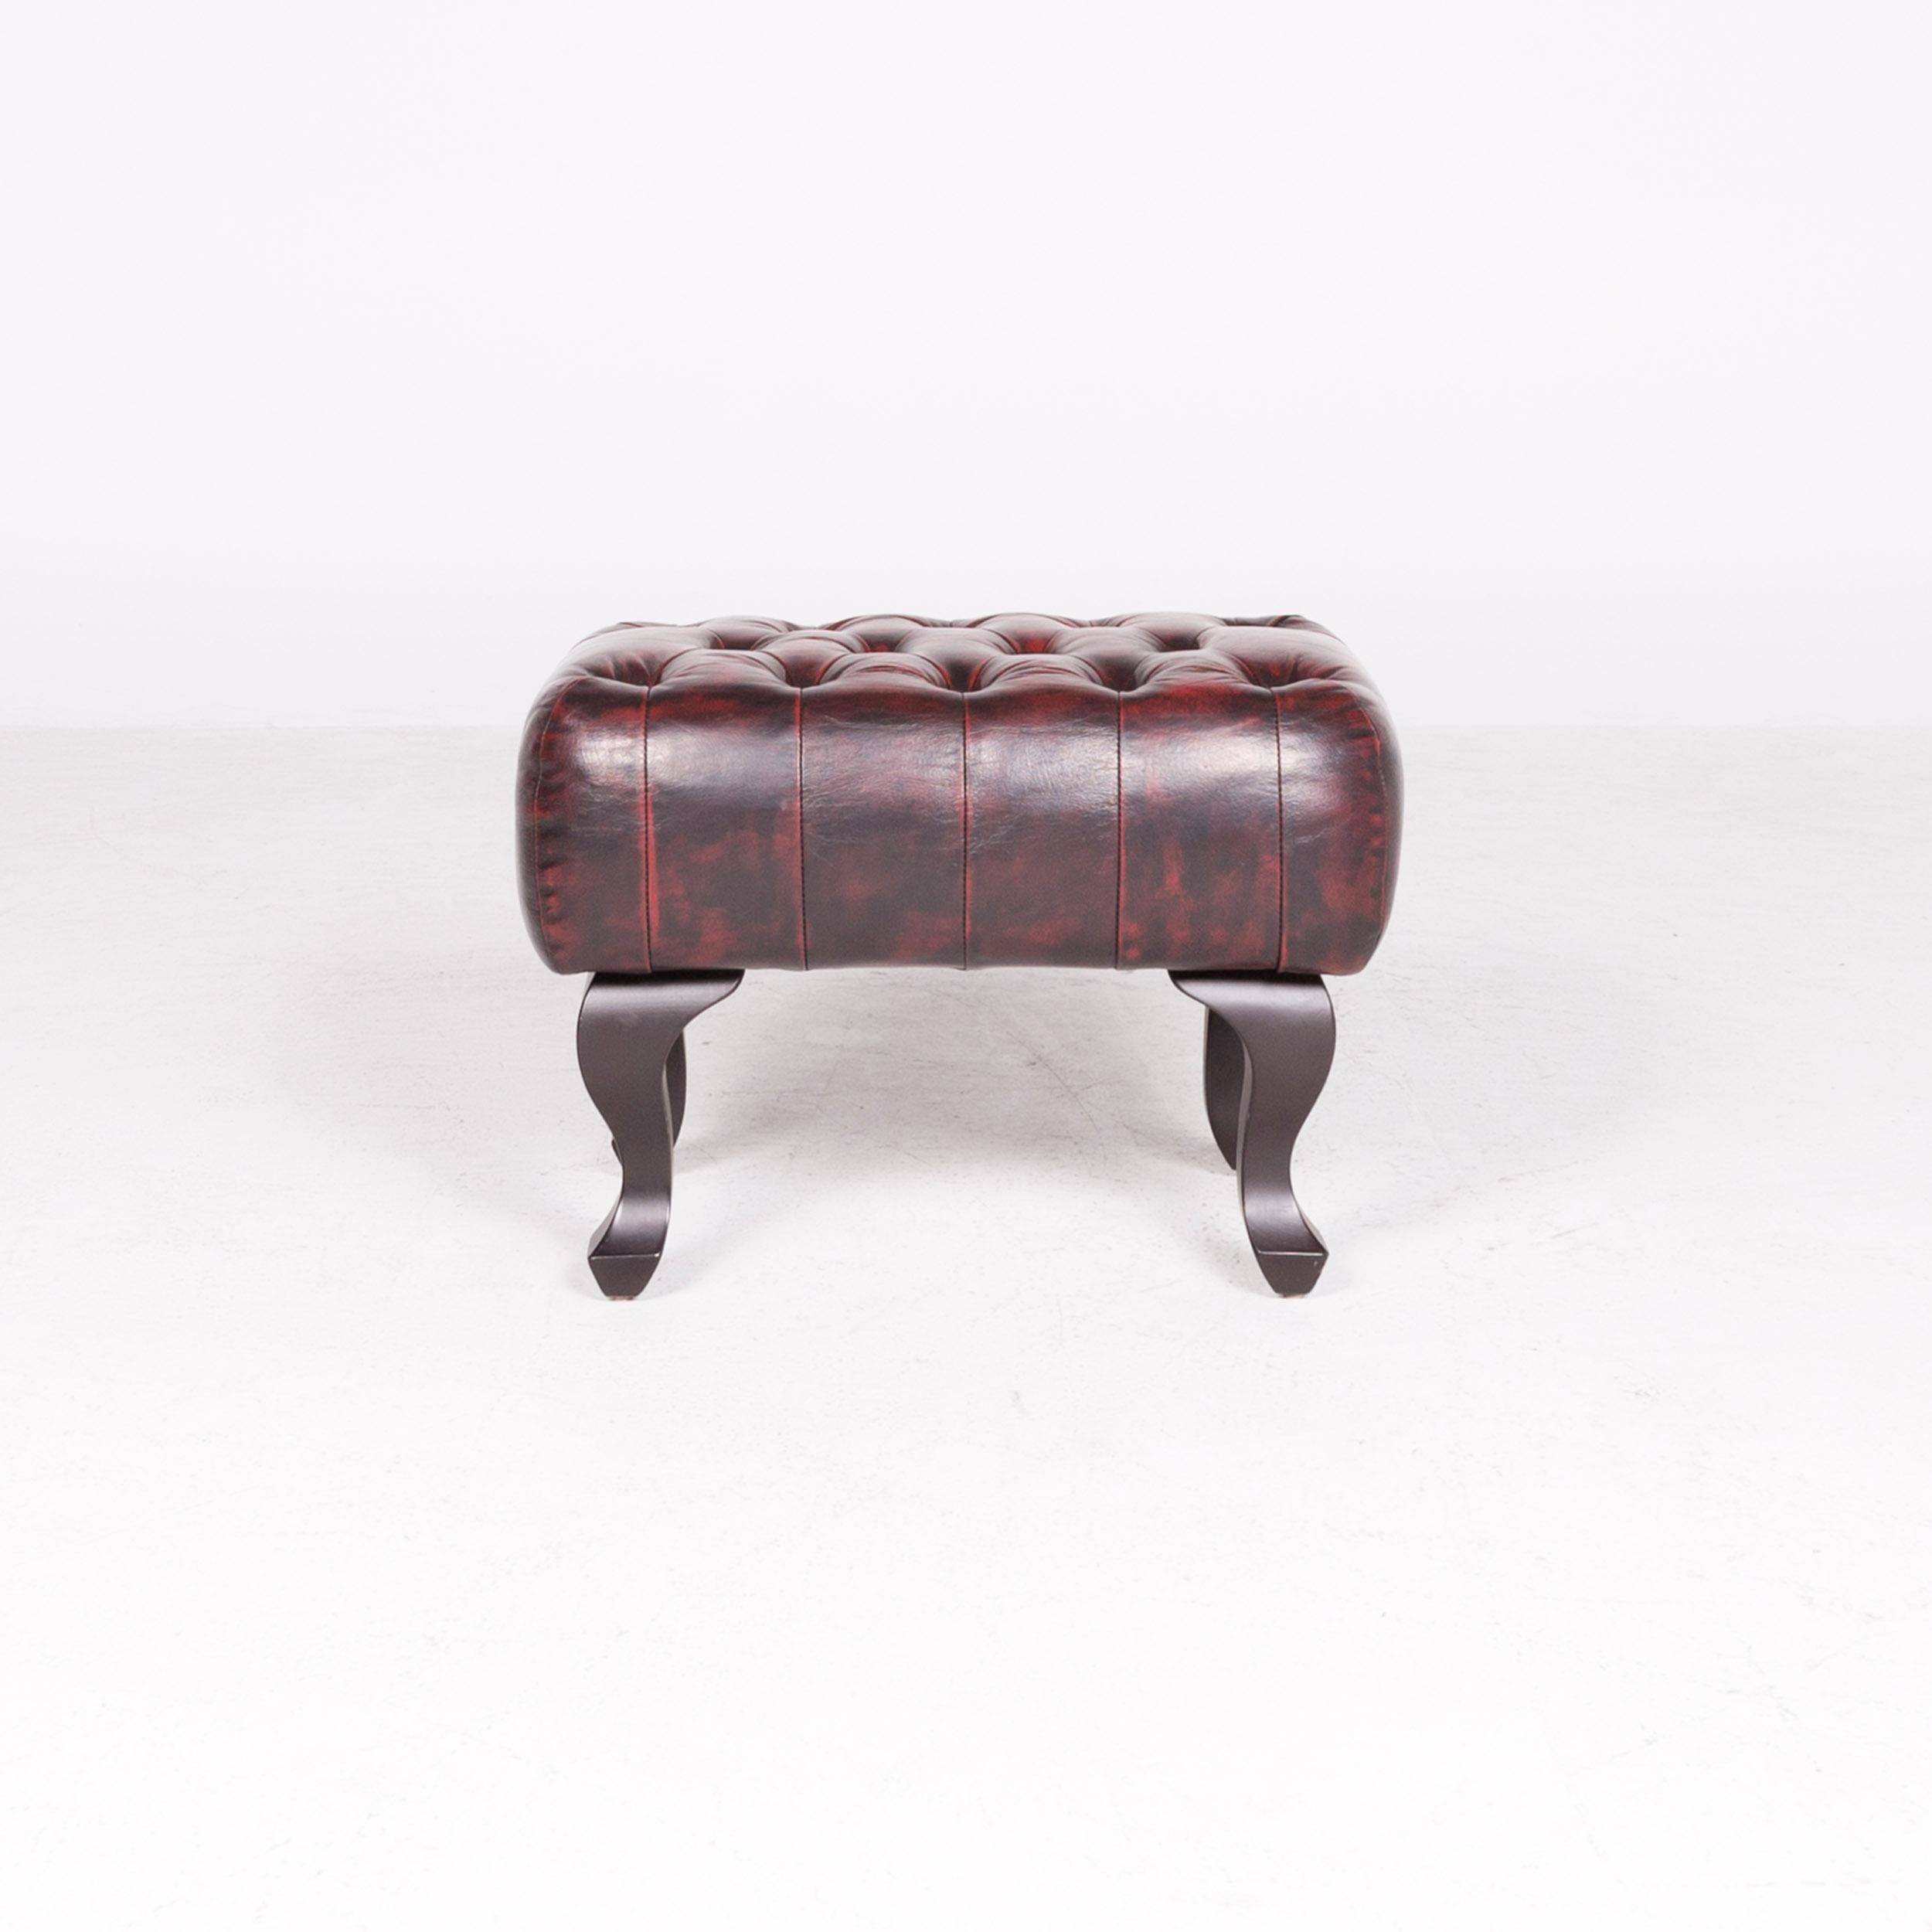 Modern Chesterfield Leather Stool Red Genuine Leather Stool Vintage Retro For Sale